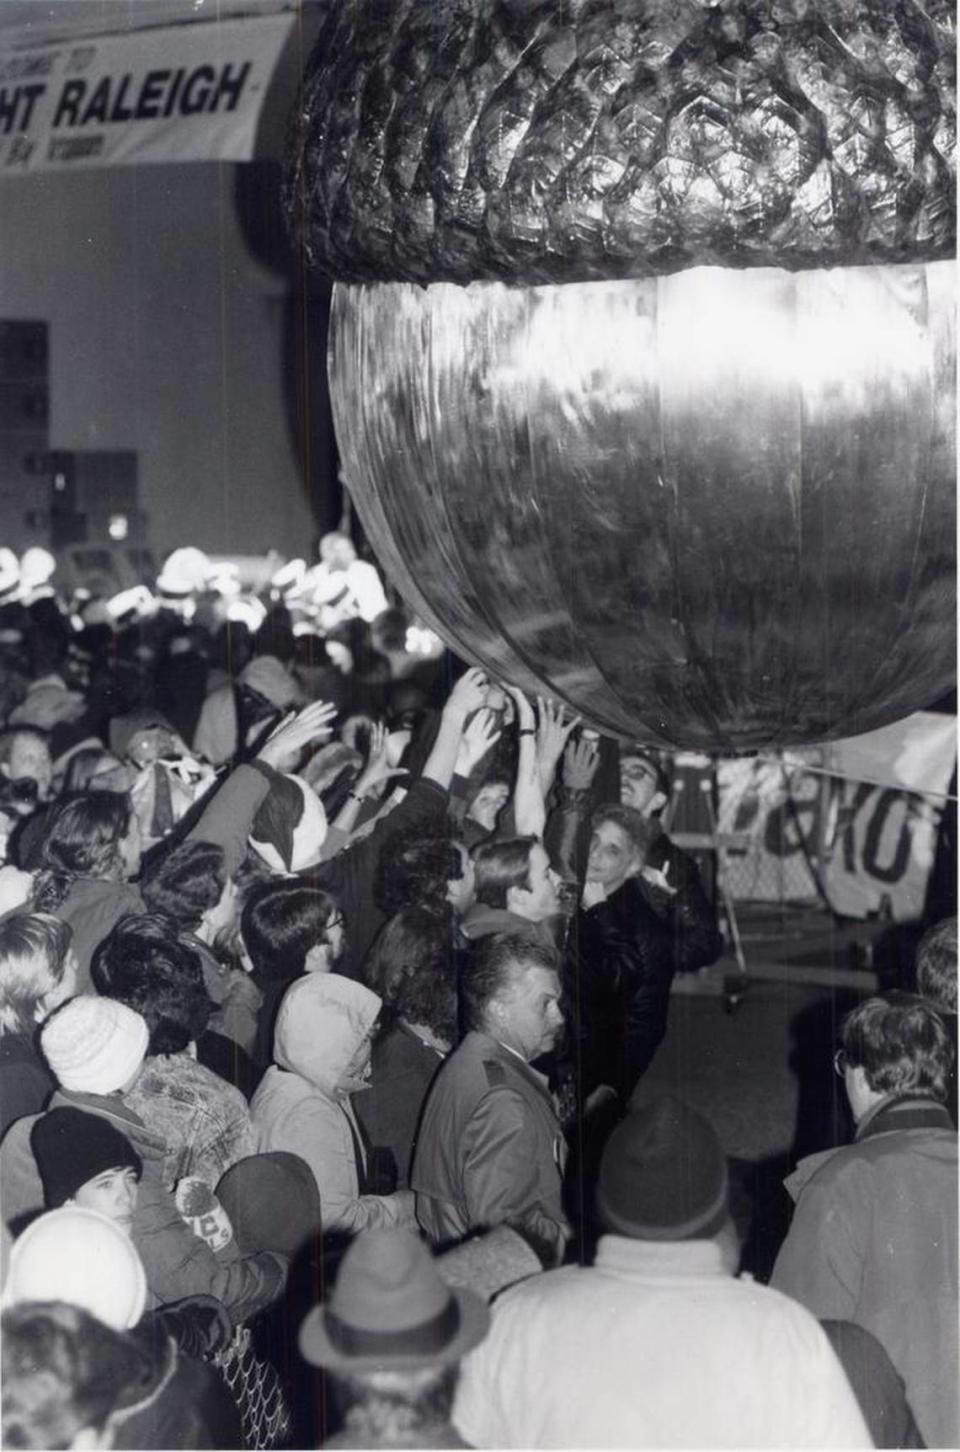 Crowds from Raleigh’s first “First Night” festivities greeted 1992 by touching the acorn for luck. N&O File Photo